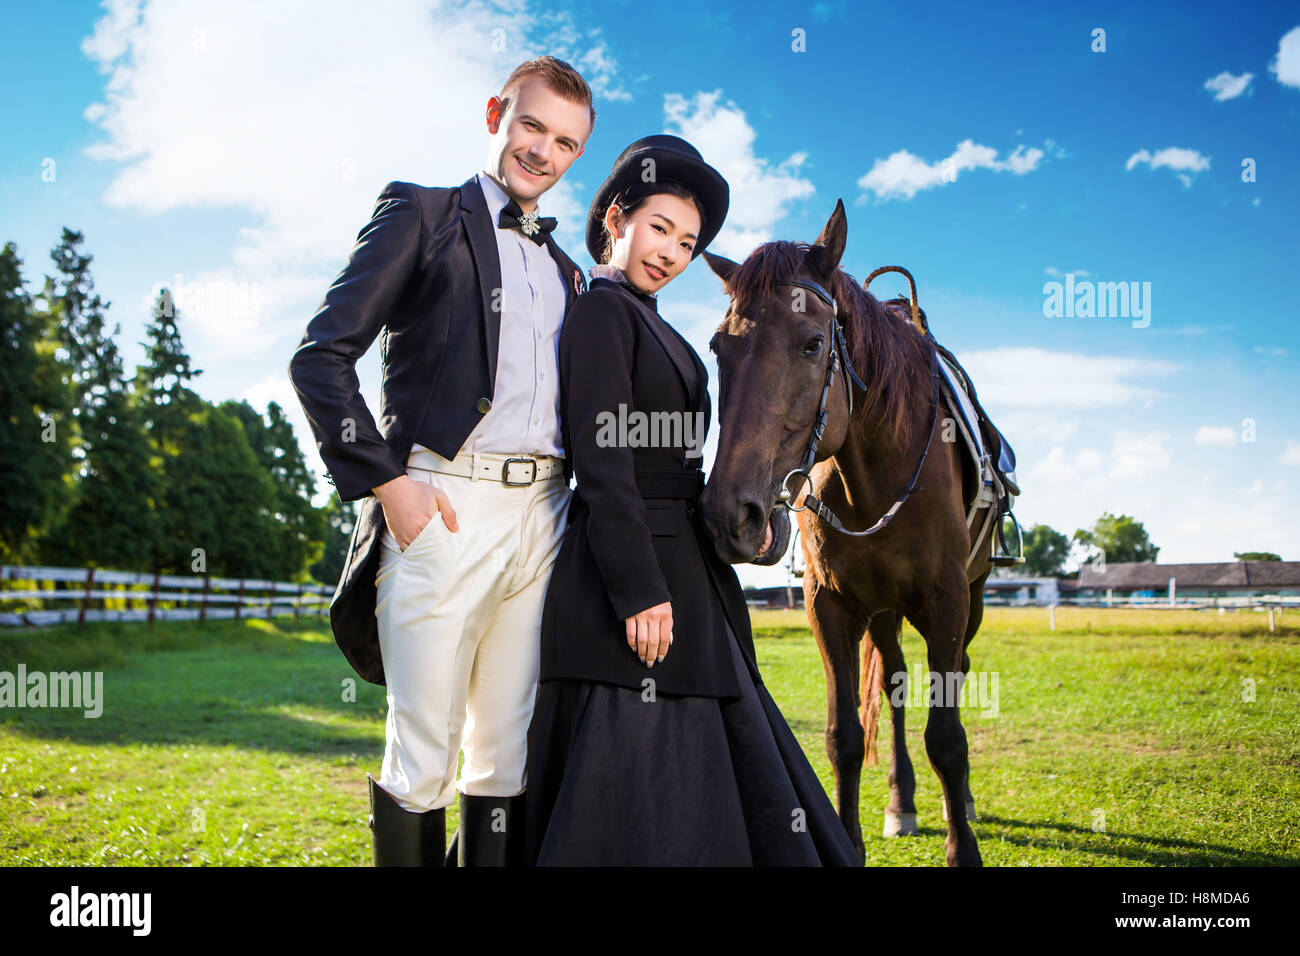 Portrait of confident well-dressed couple standing with horse on field Stock Photo